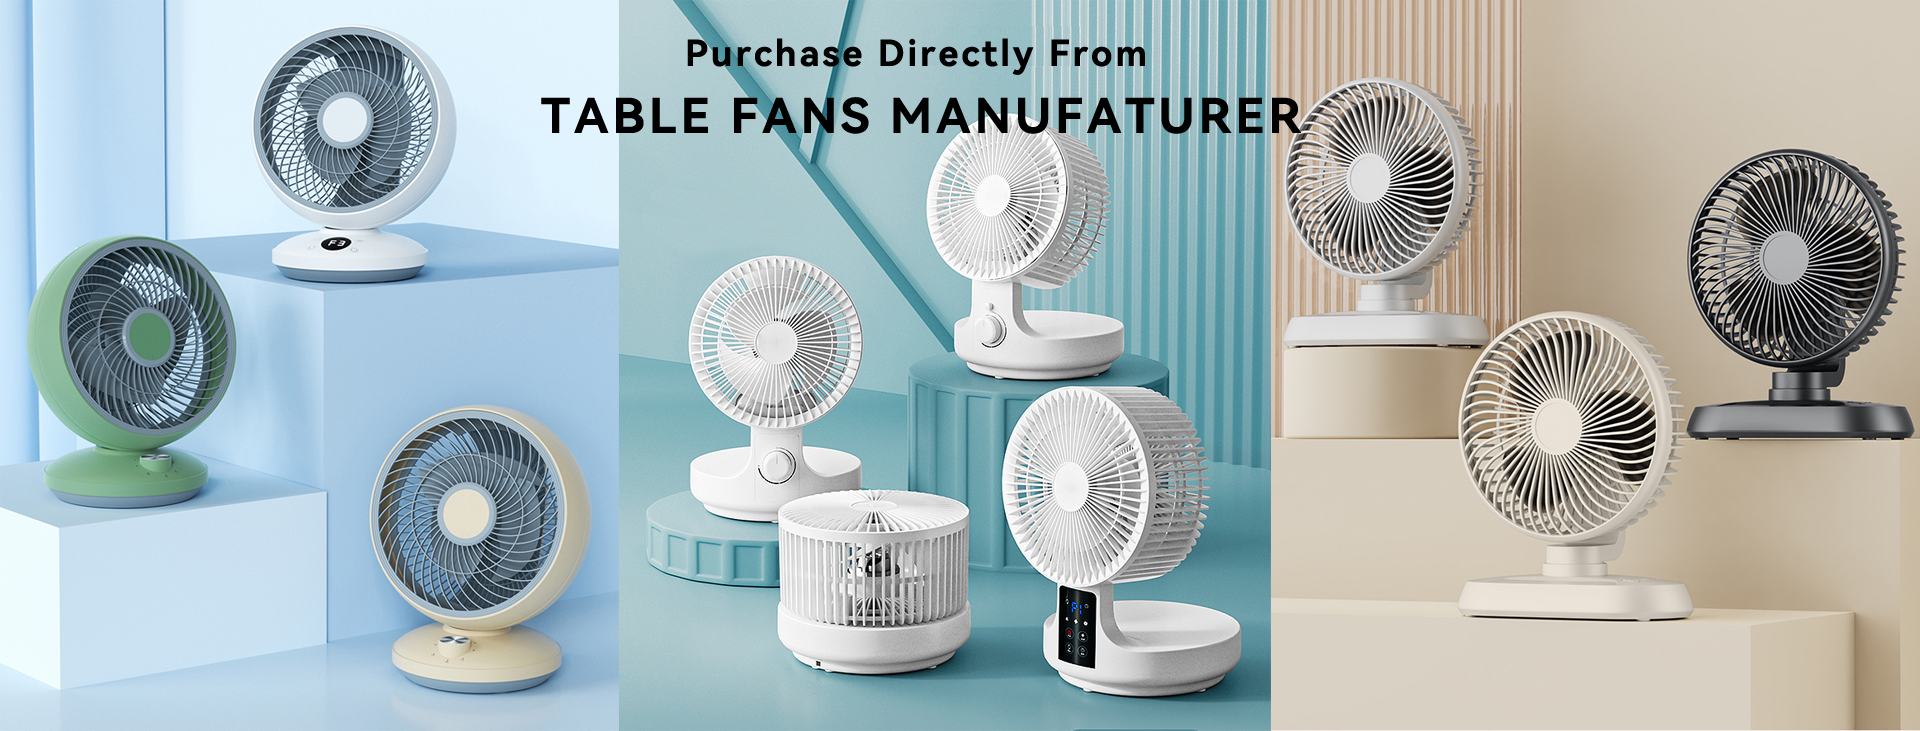 Purchase directly from Desk fans table fan manufacturer & supplier in China